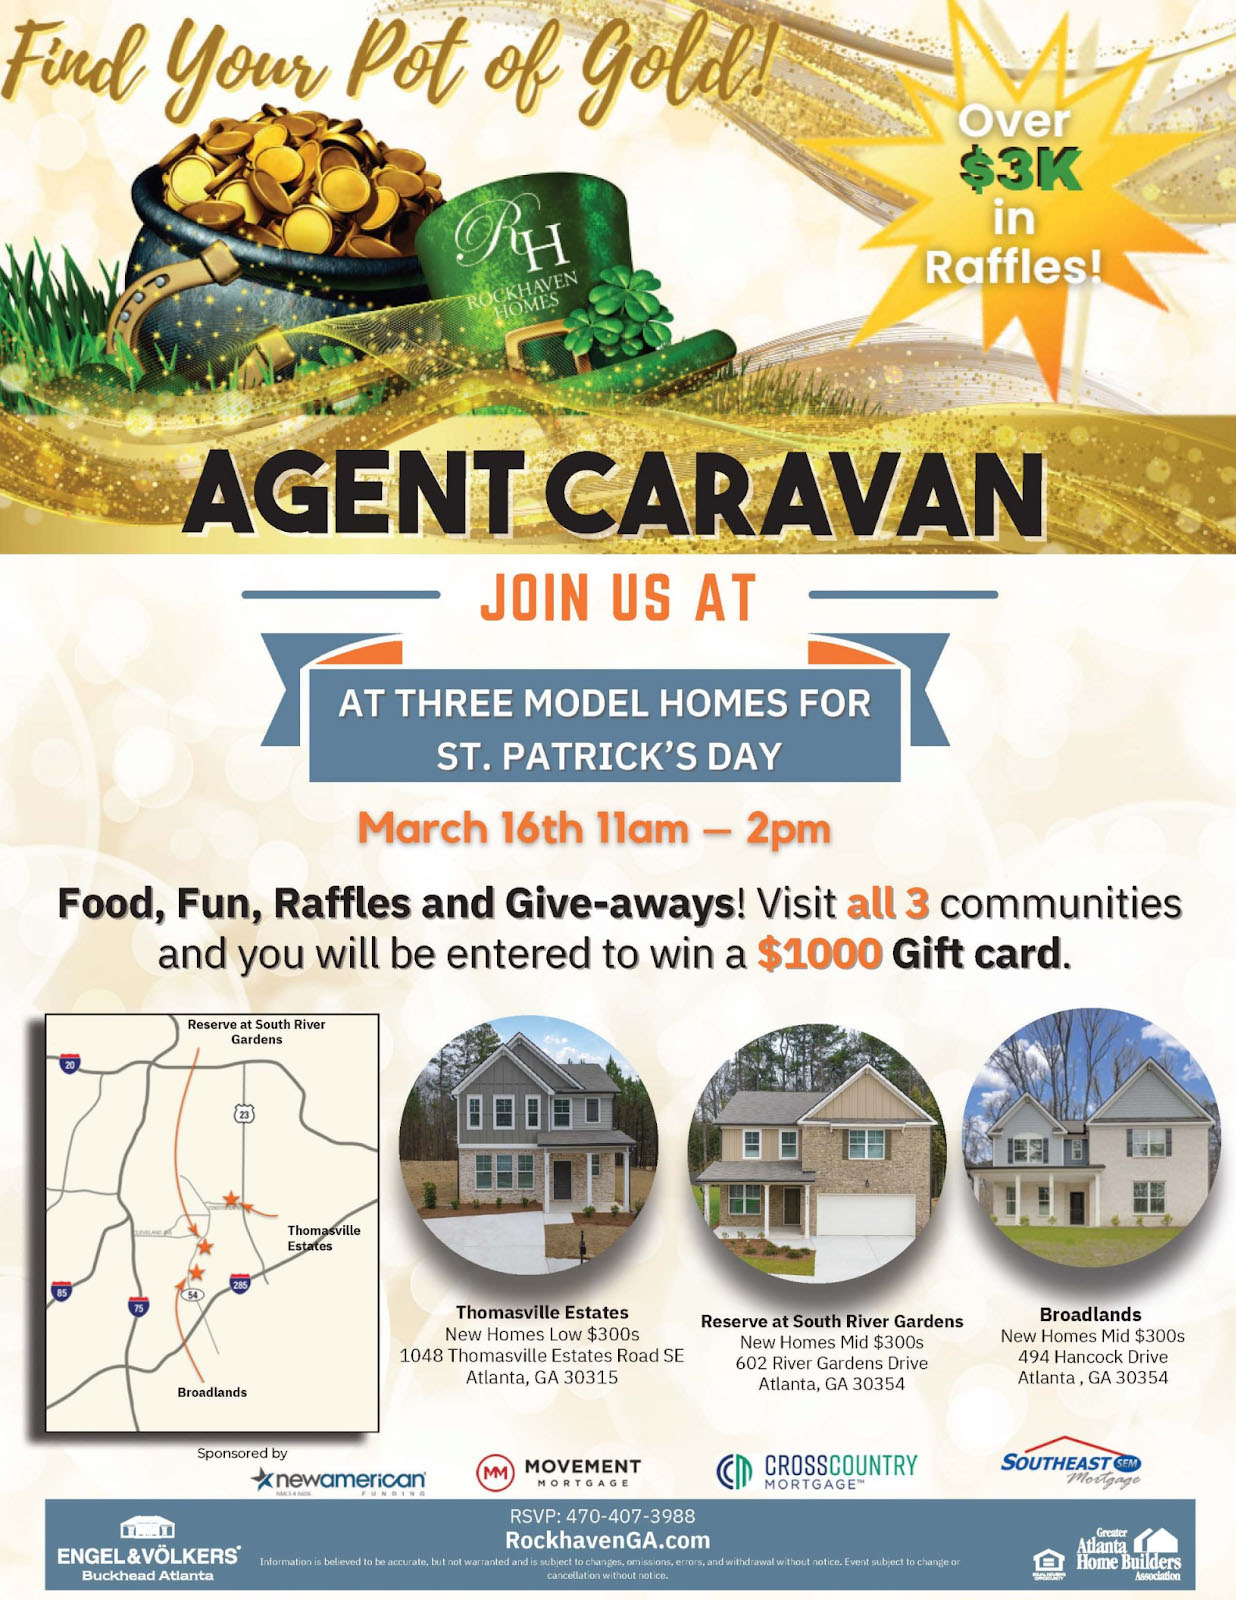 Flyer for a real estate caravan on St. Patrick's Day by Rock Haven Homes.